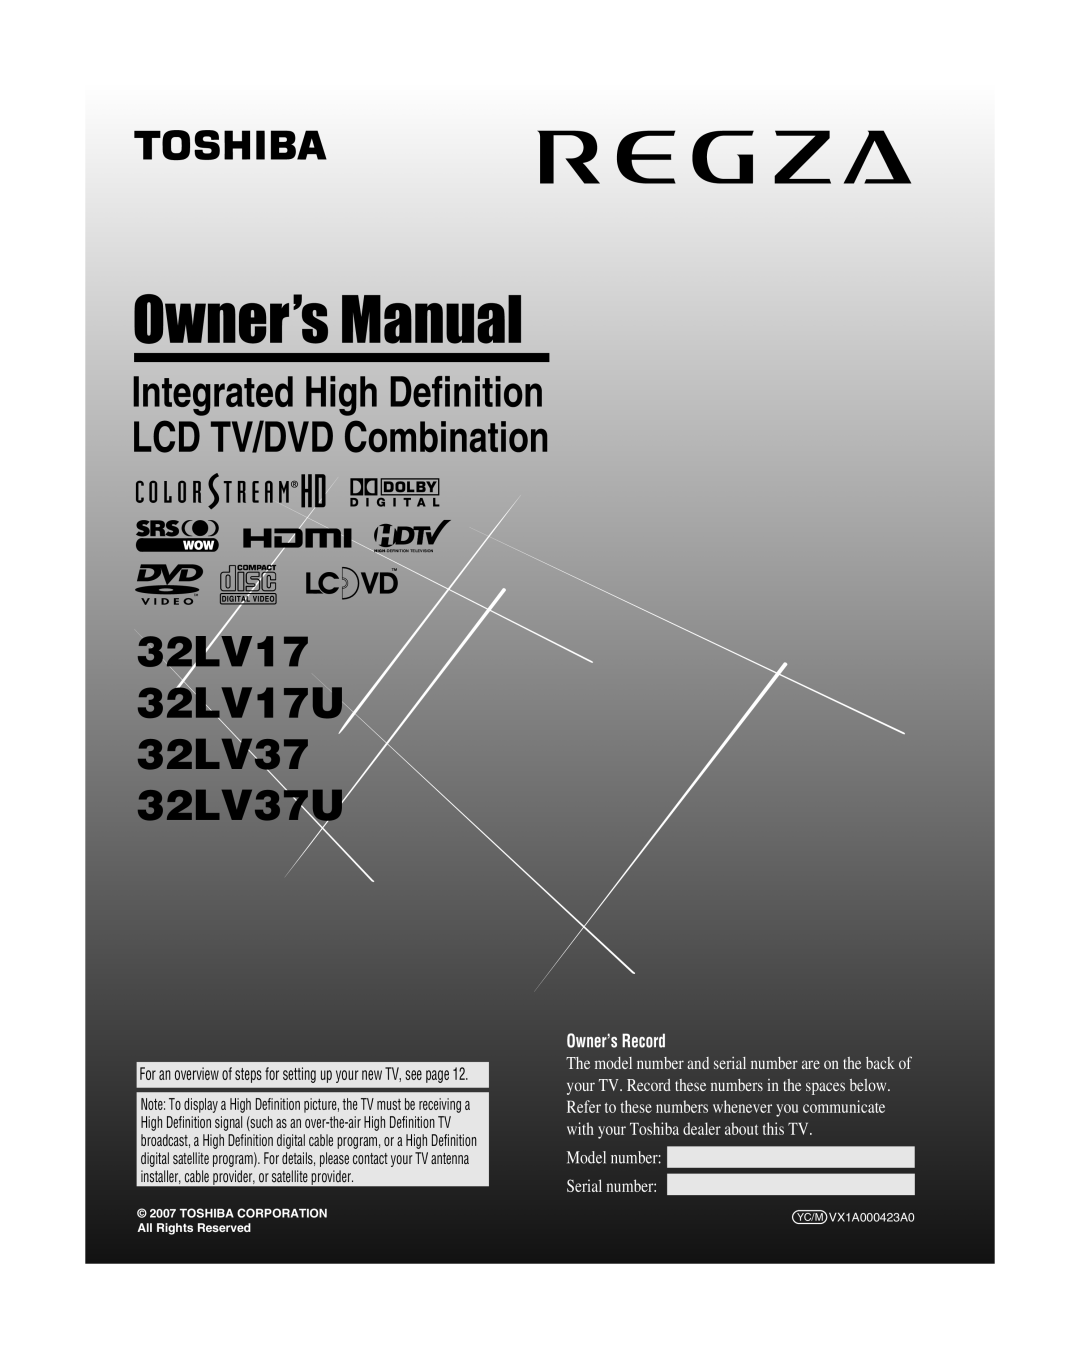 Toshiba manual For an overview of steps for setting up your new TV, see page, 32LV17 32LV17U 32LV37 32LV37U 